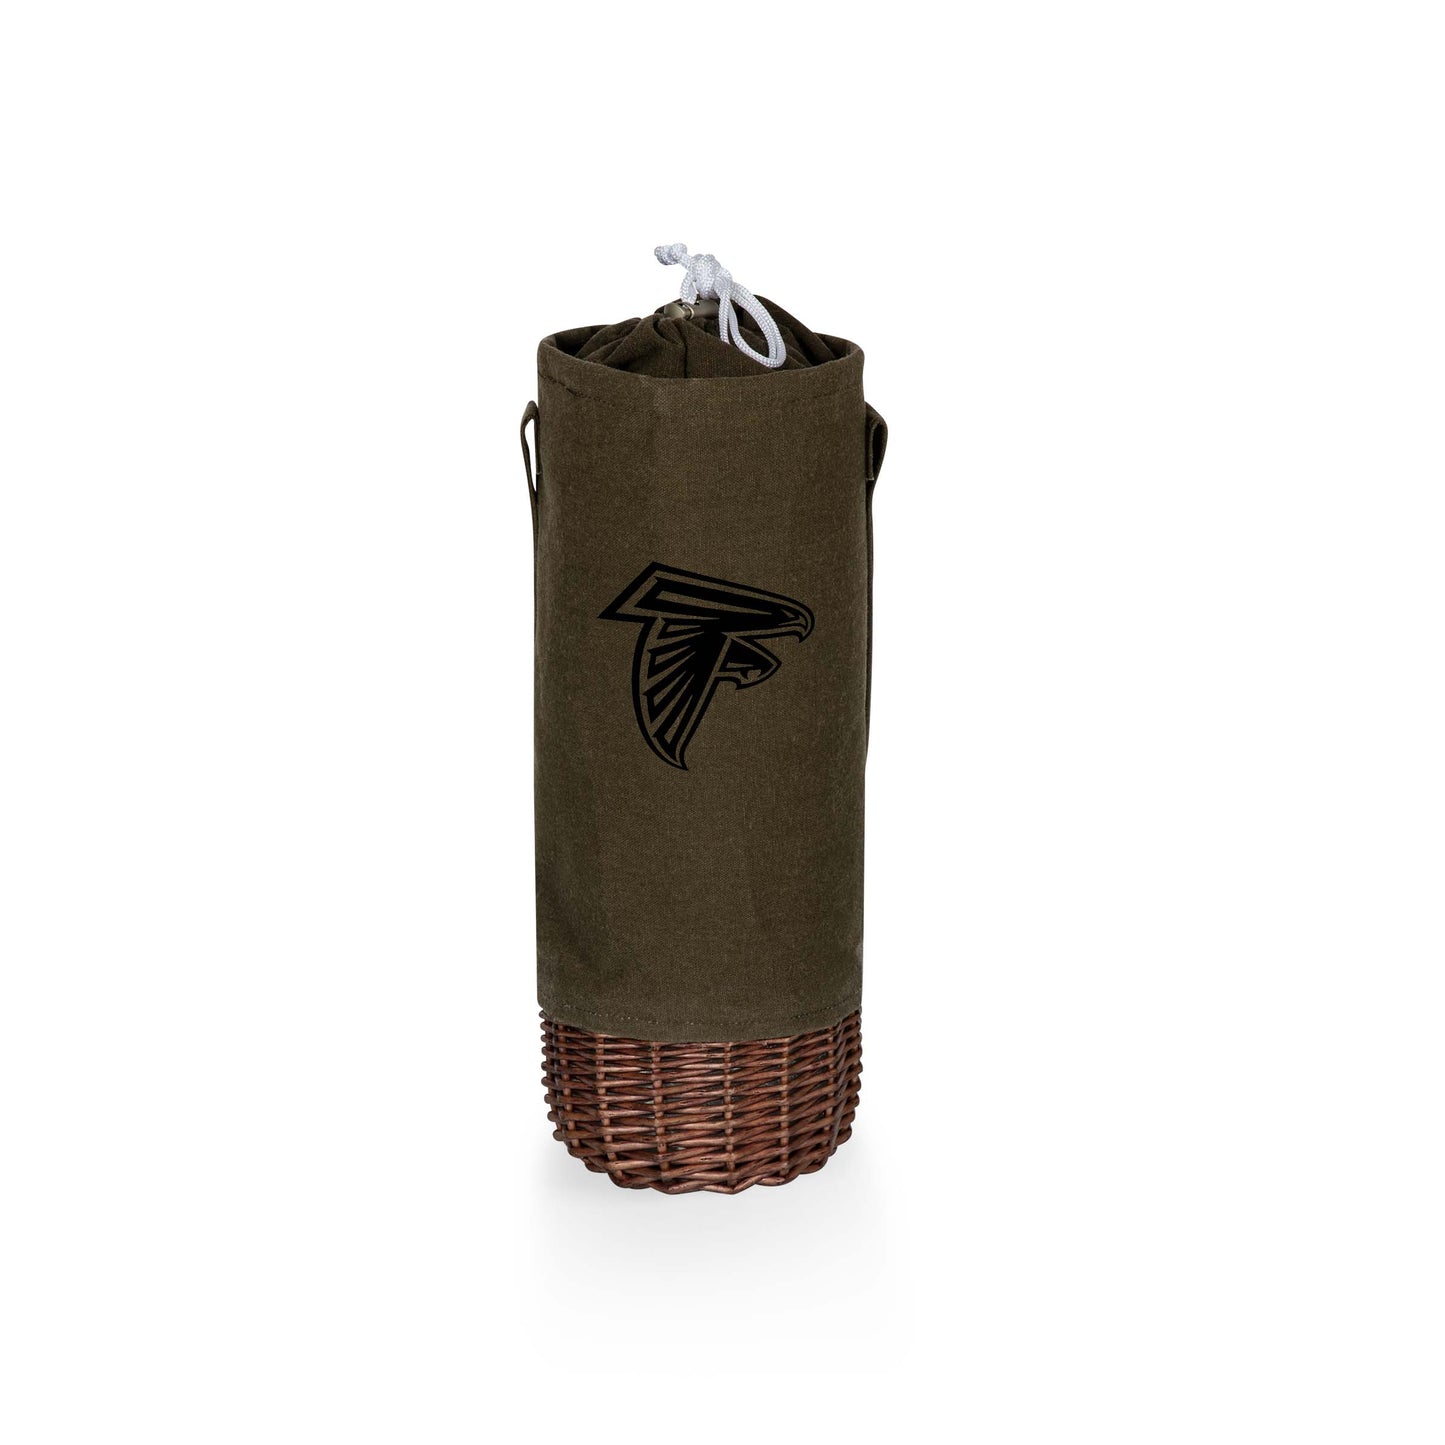 Atlanta Falcons - Malbec Insulated Canvas and Willow Wine Bottle Basket